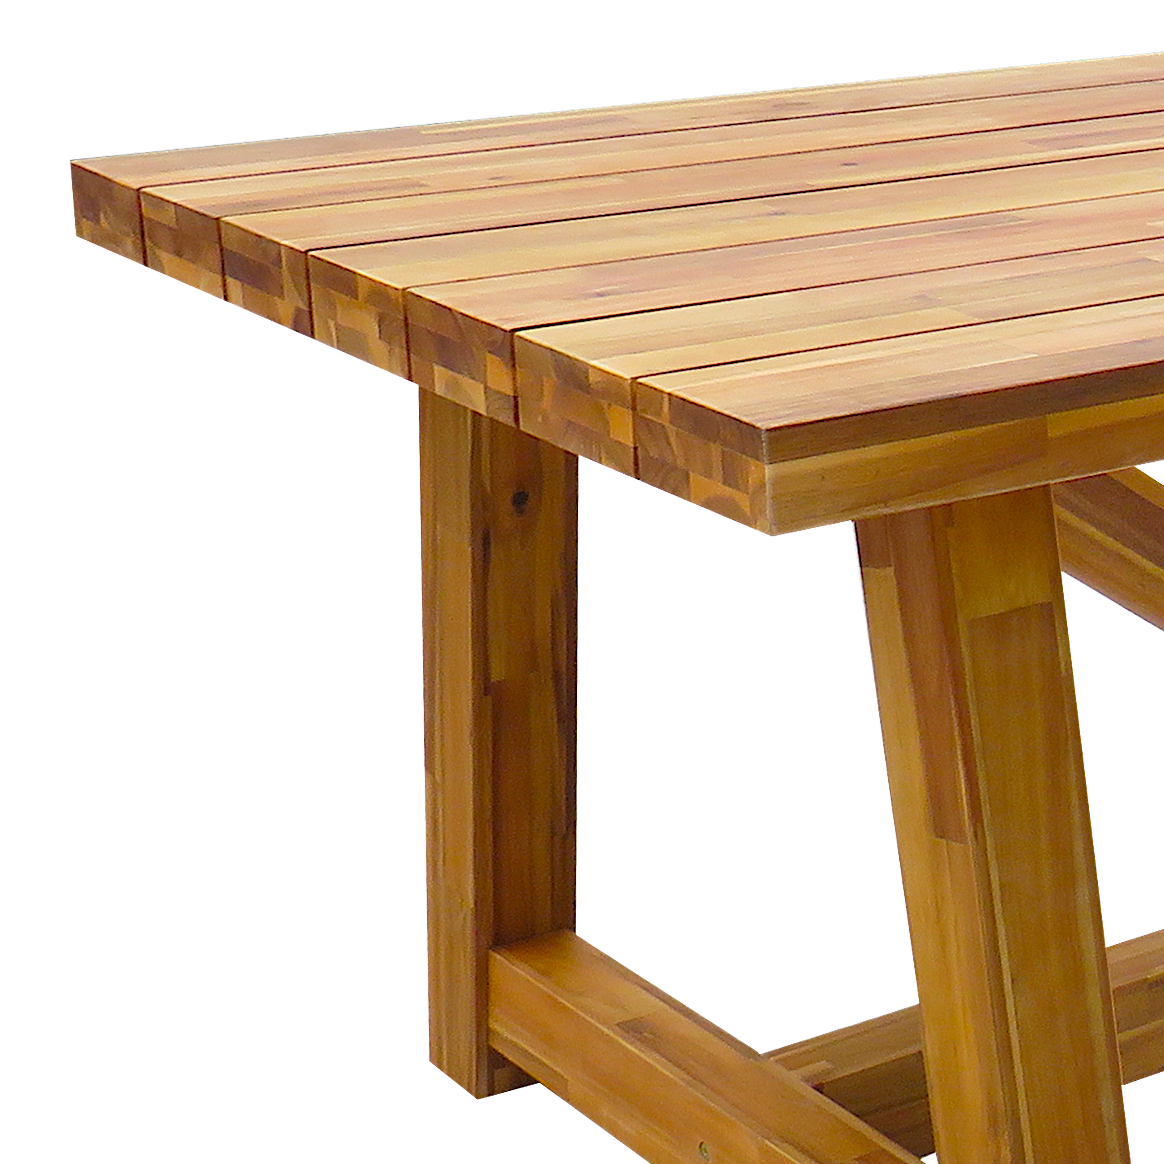 81031 CAHORS Table